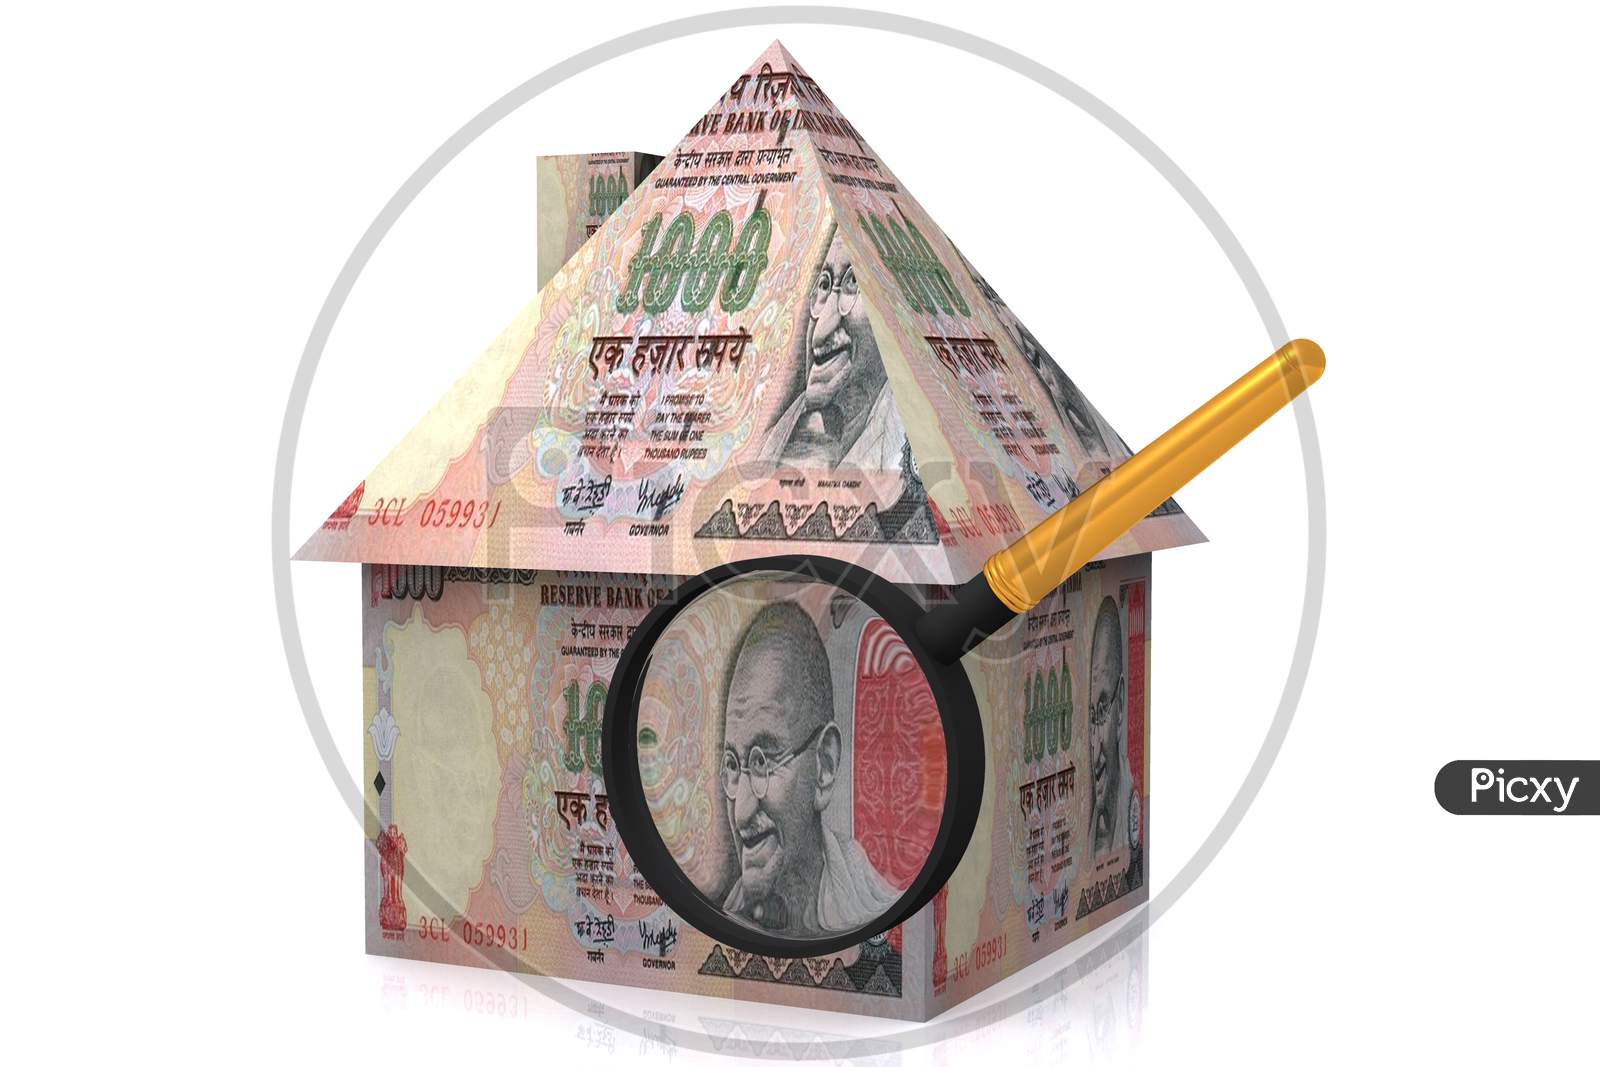 A House built with Indian Currency Notes